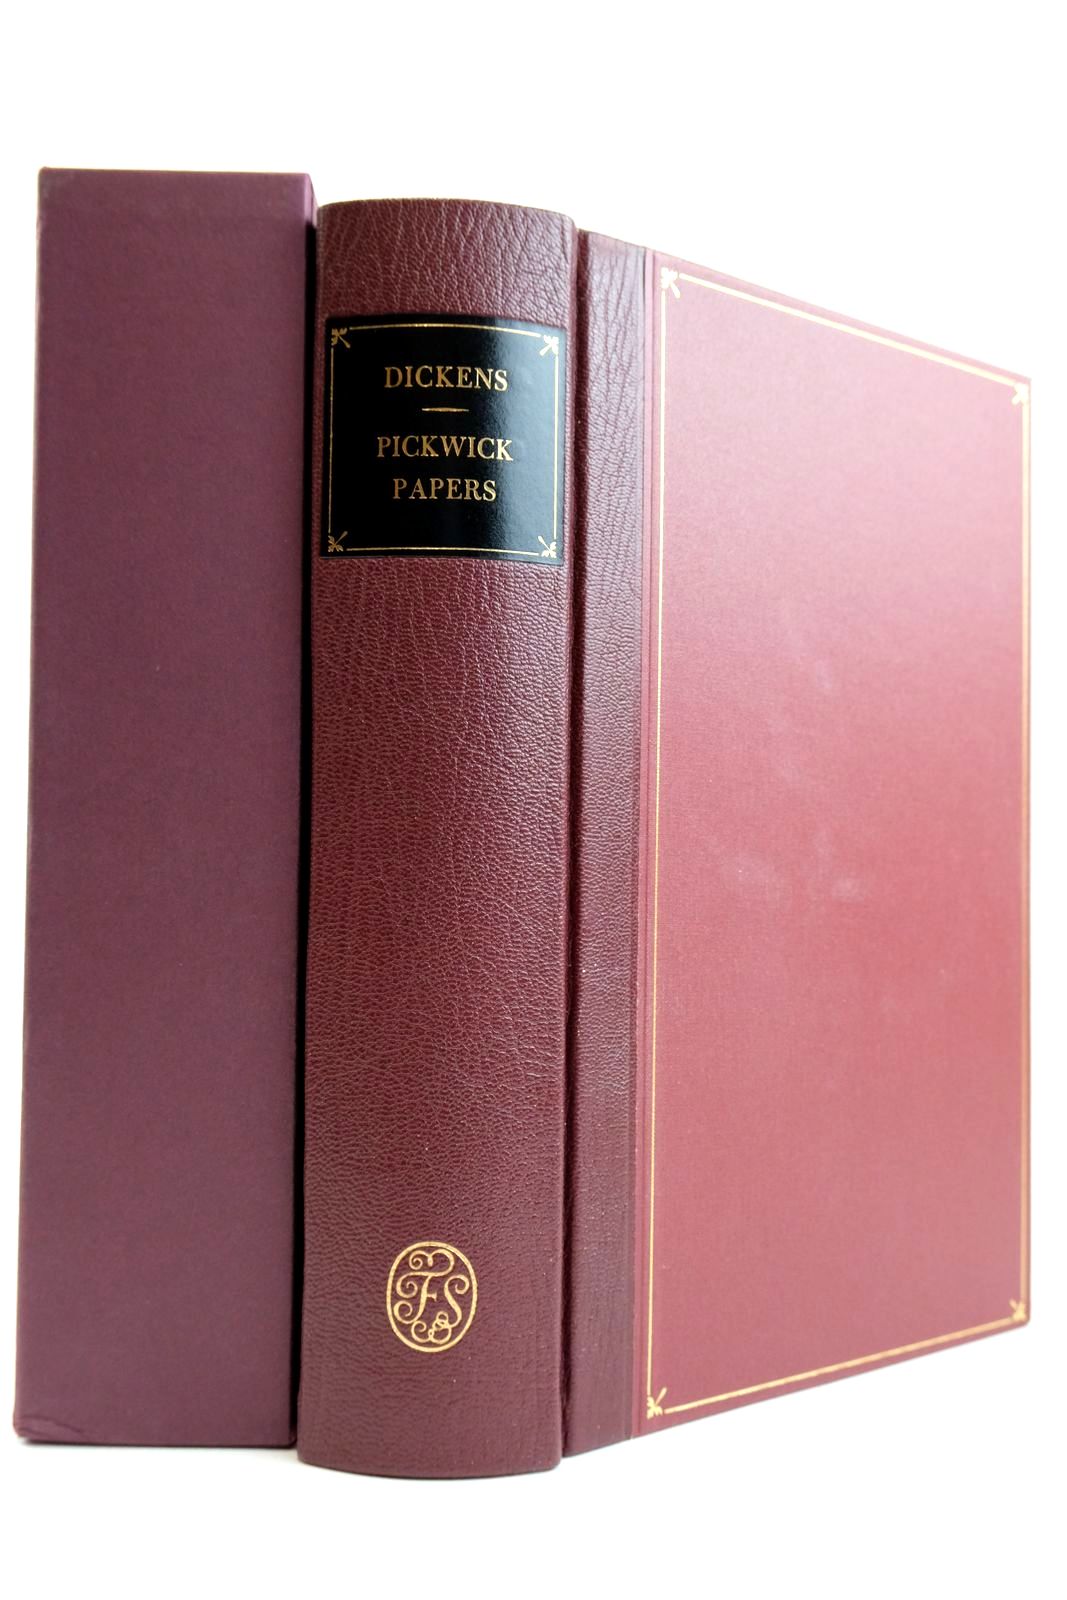 Photo of THE POSTHUMOUS PAPERS OF THE PICKWICK CLUB written by Dickens, Charles illustrated by Seymour, R.
Buss, R.W.
Phiz, published by Folio Society (STOCK CODE: 2132421)  for sale by Stella & Rose's Books